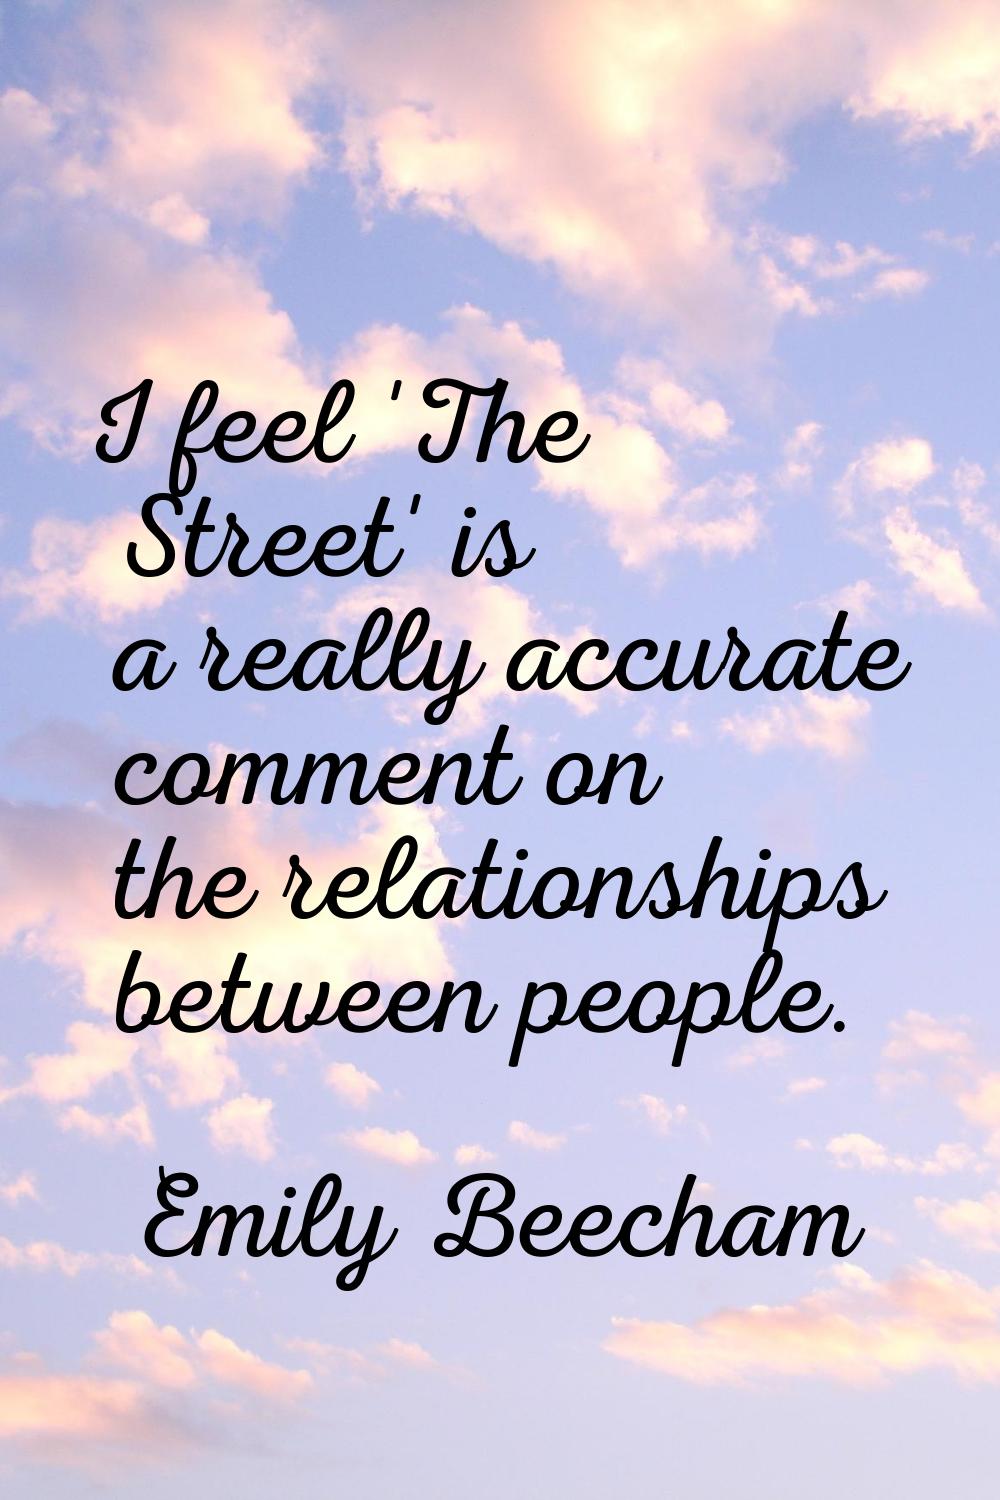 I feel 'The Street' is a really accurate comment on the relationships between people.